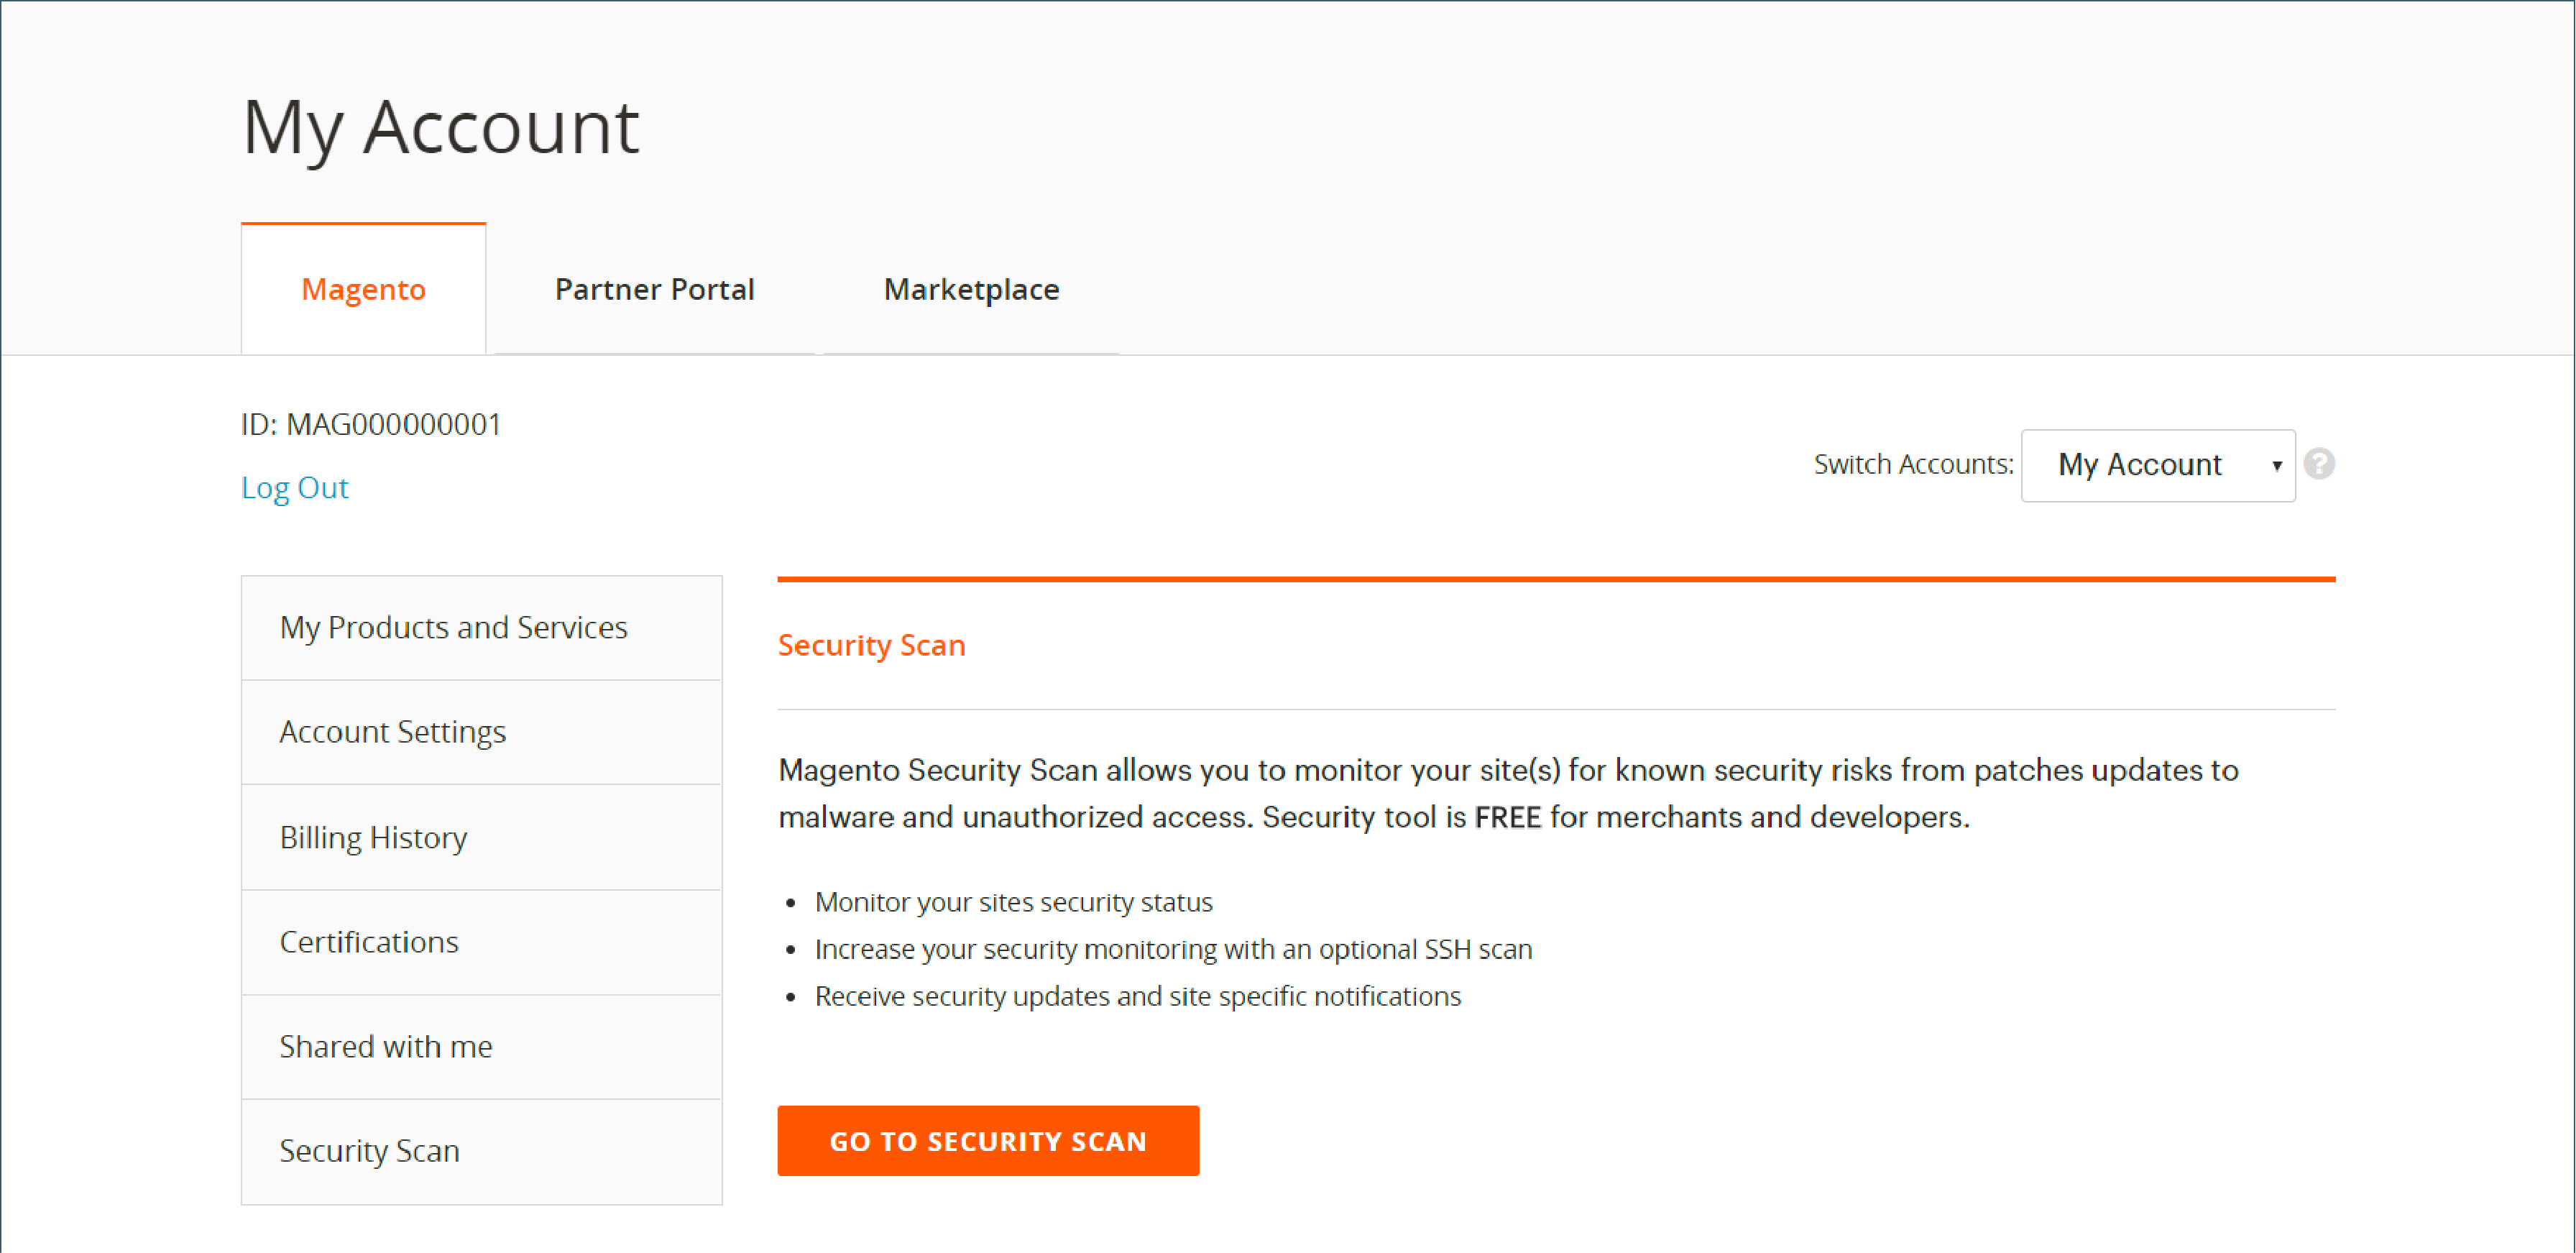 Magento Security Scan Tool identifying potential vulnerabilities